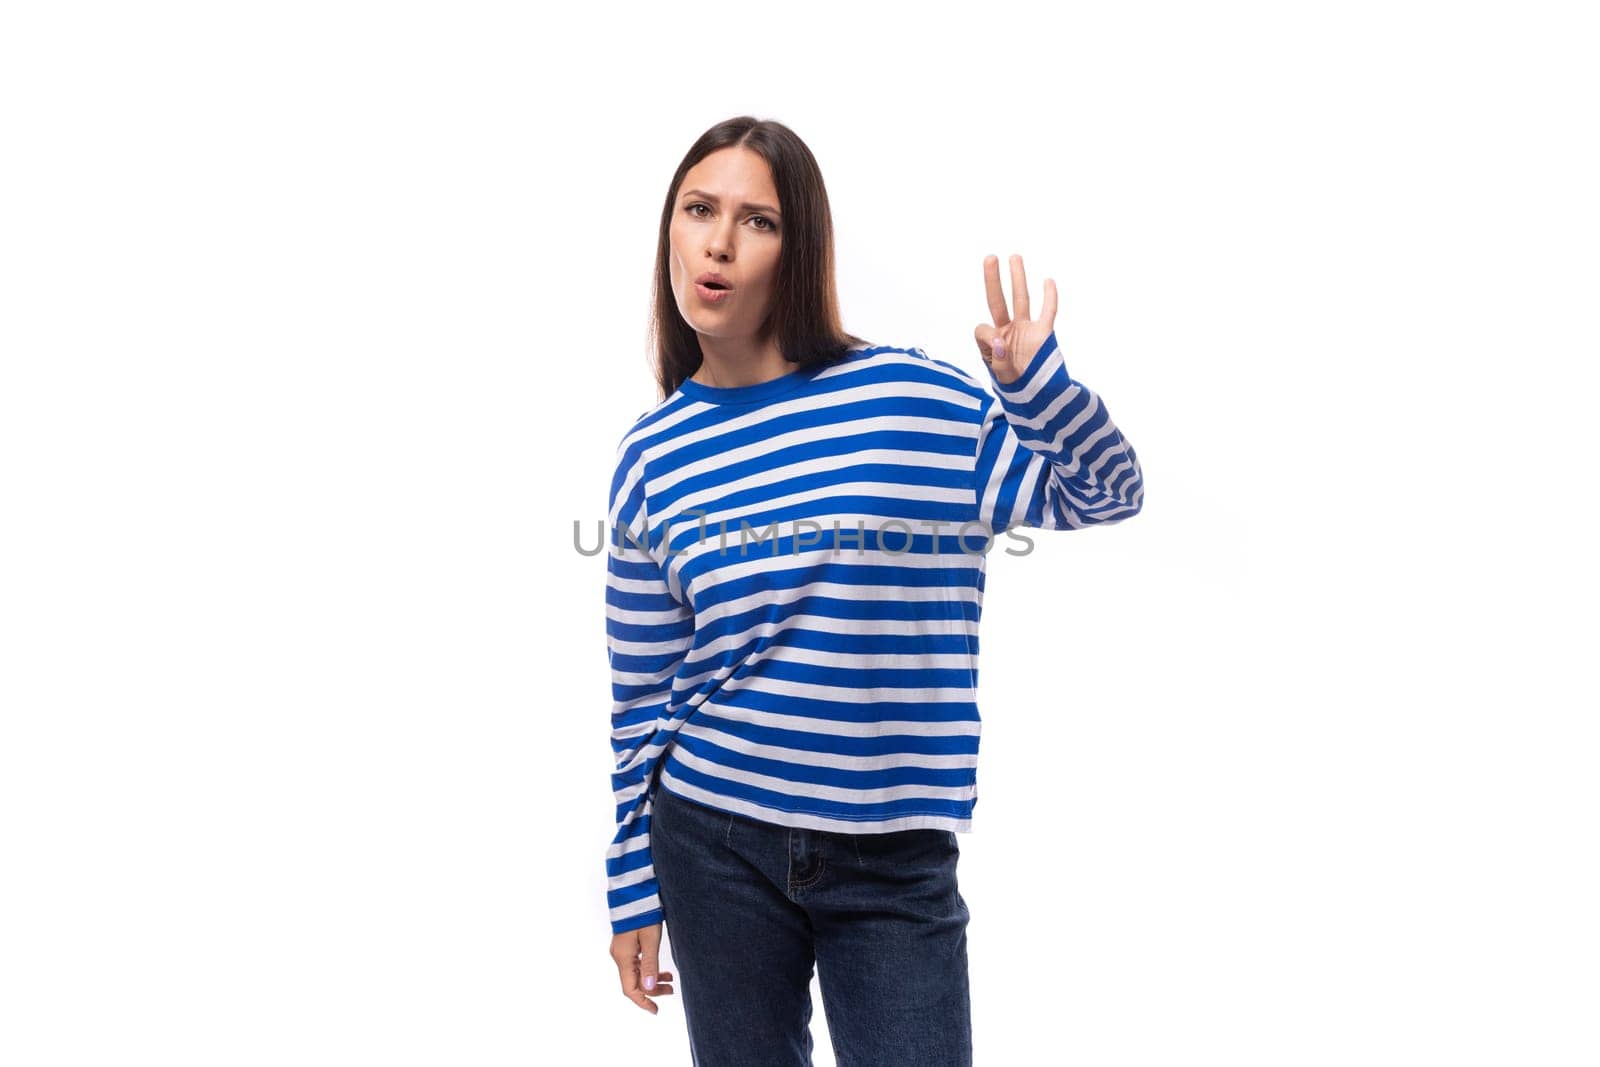 smart young stylish woman with straight hair dressed in a striped sweater by TRMK